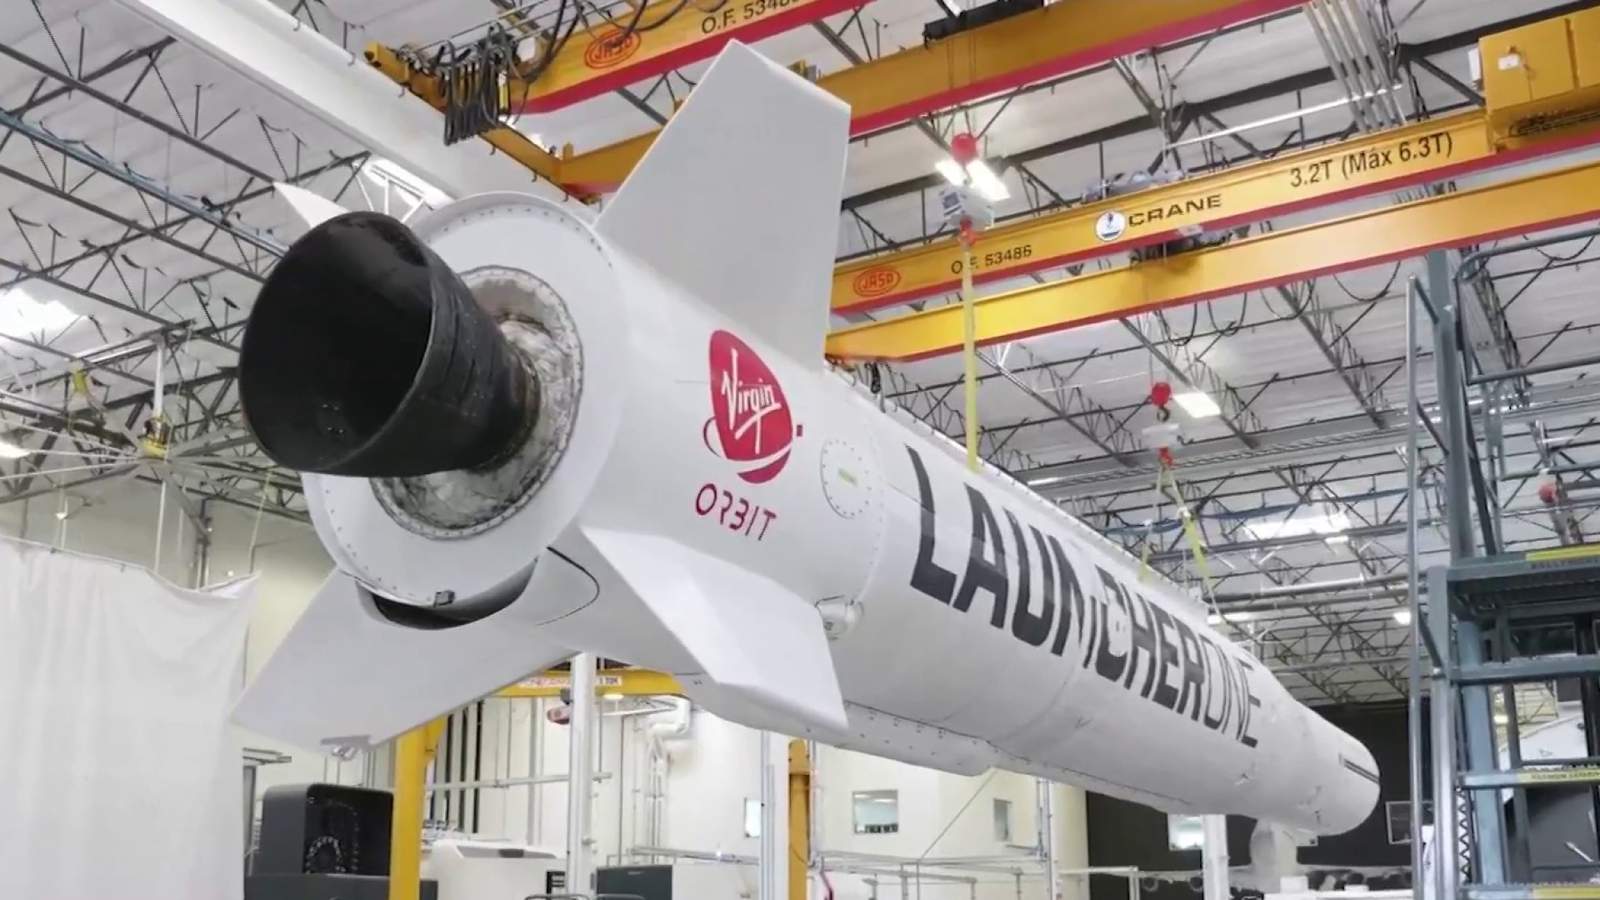 Virgin Orbit closes in on launching rocket from 747 jet, attempting to reach low-Earth orbit